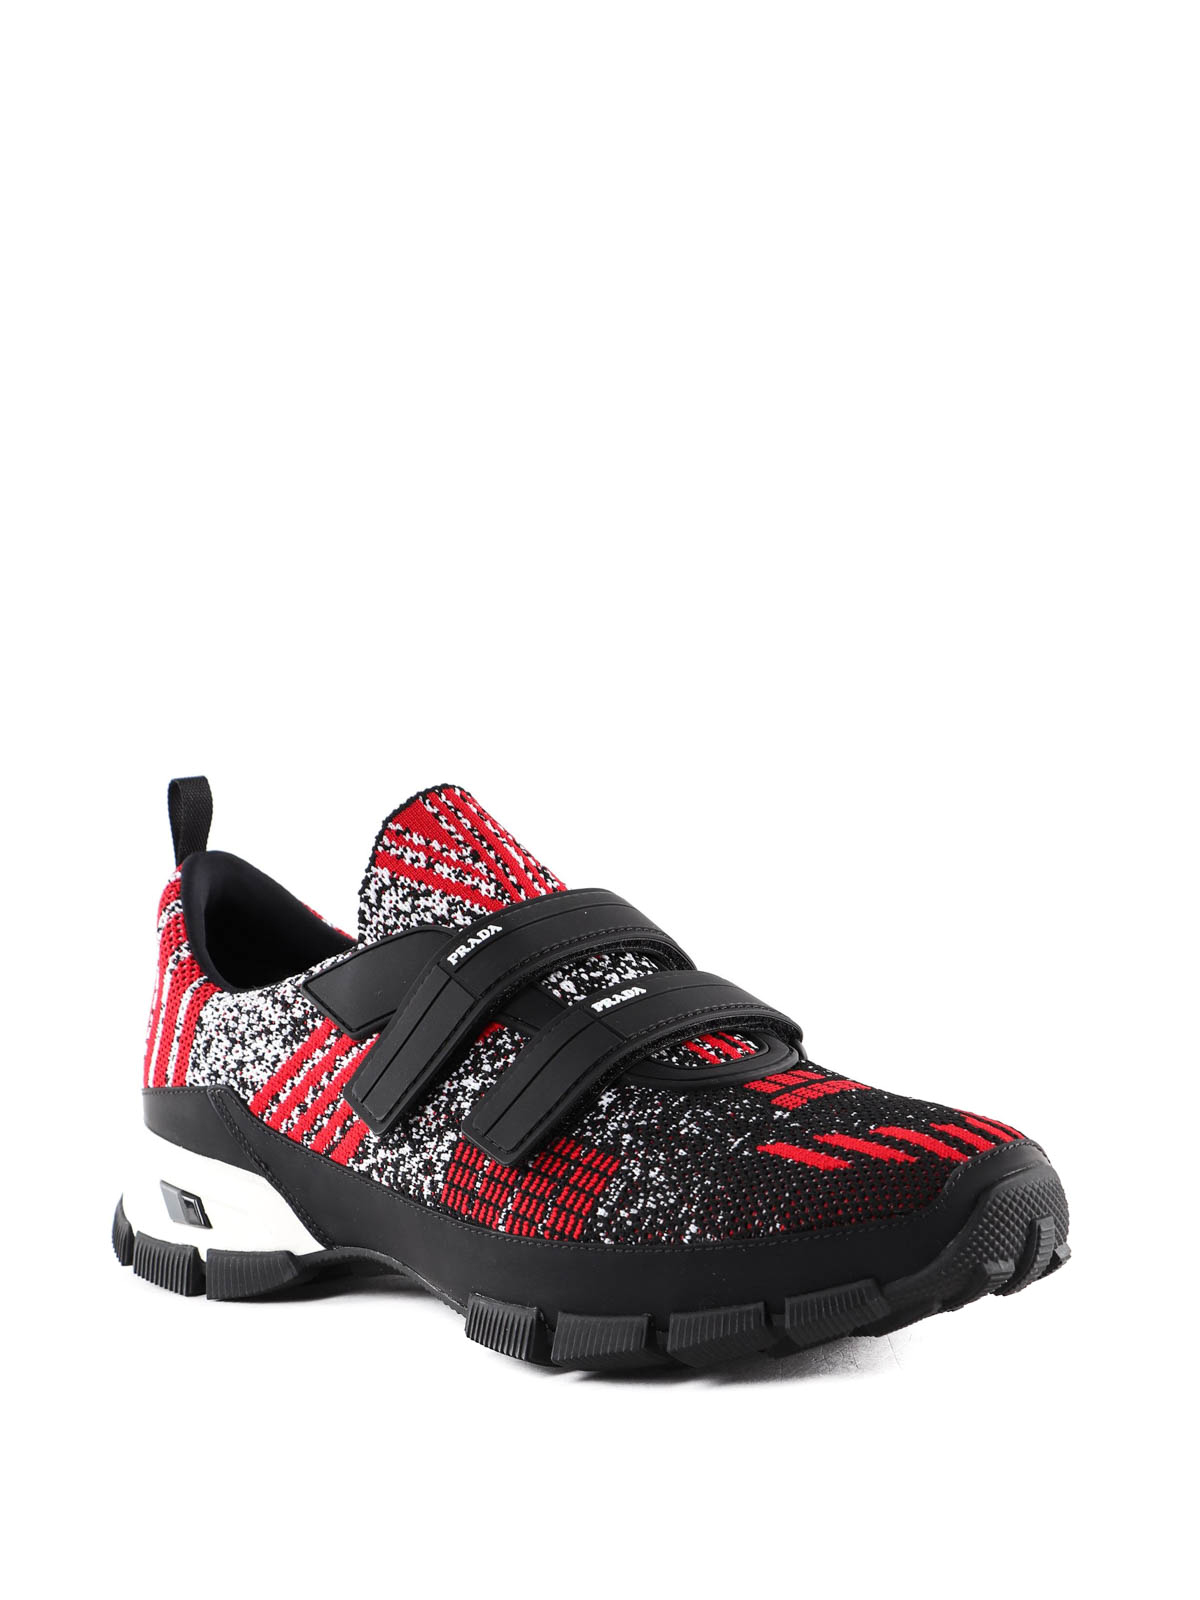 Prada - Crossection knit black and red 